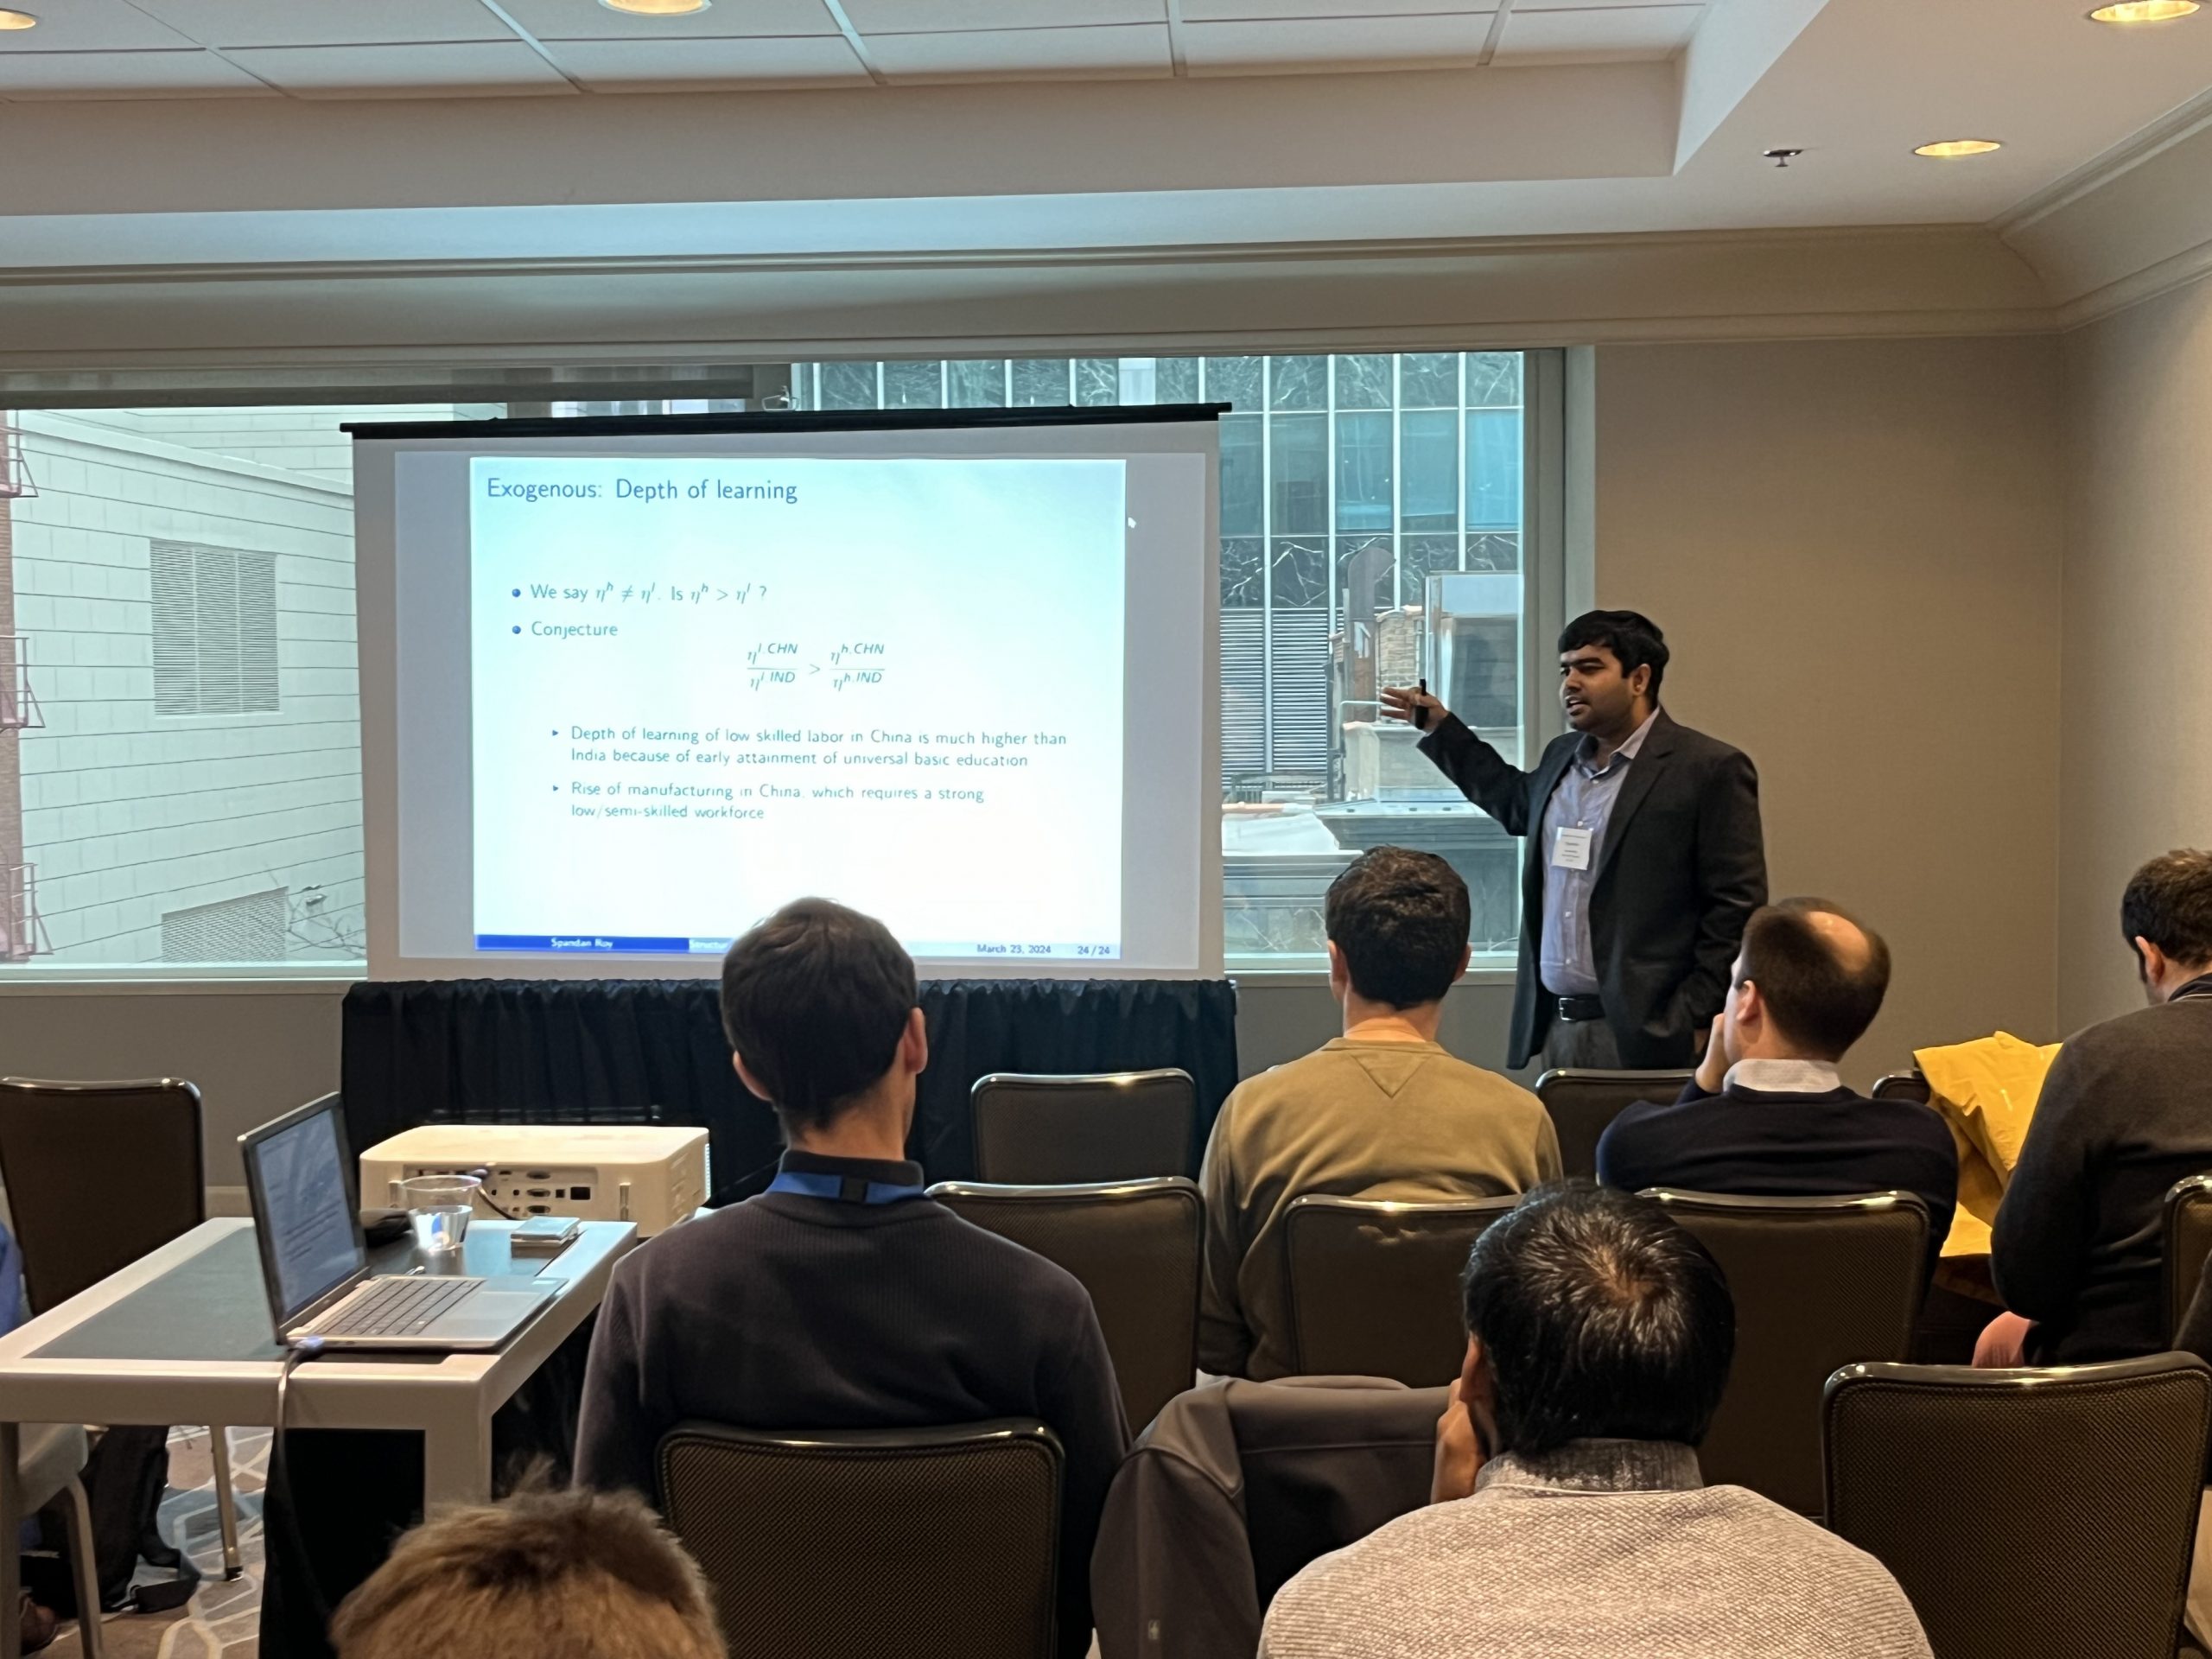 Spandan Roy presents his research at the Midwest Economics Association conference